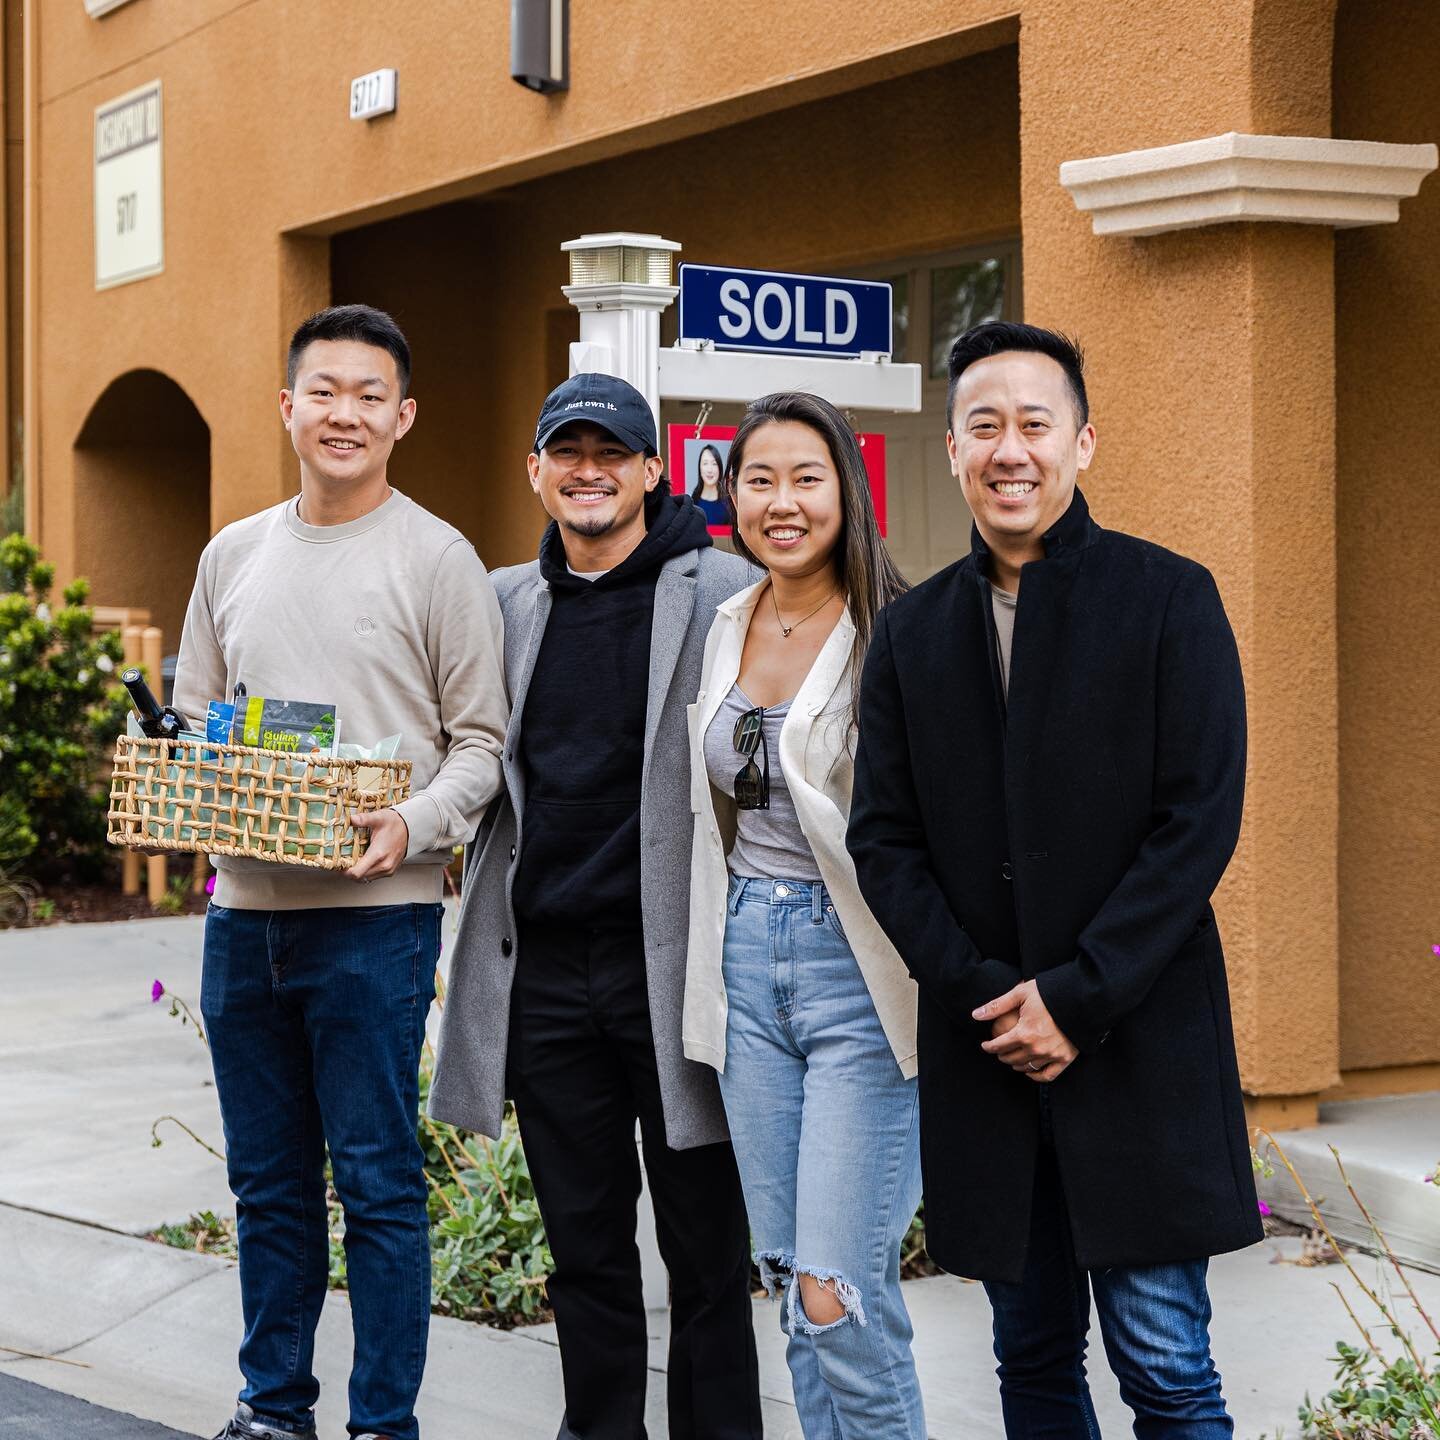 Swipe for a happy clients! ➡️
Congratulations to Wesley &amp; Justin on helping their buyers purchase their dream home! 🎉🏡 it&rsquo;s great to see our stellar agents helping client achieve their real estate goals